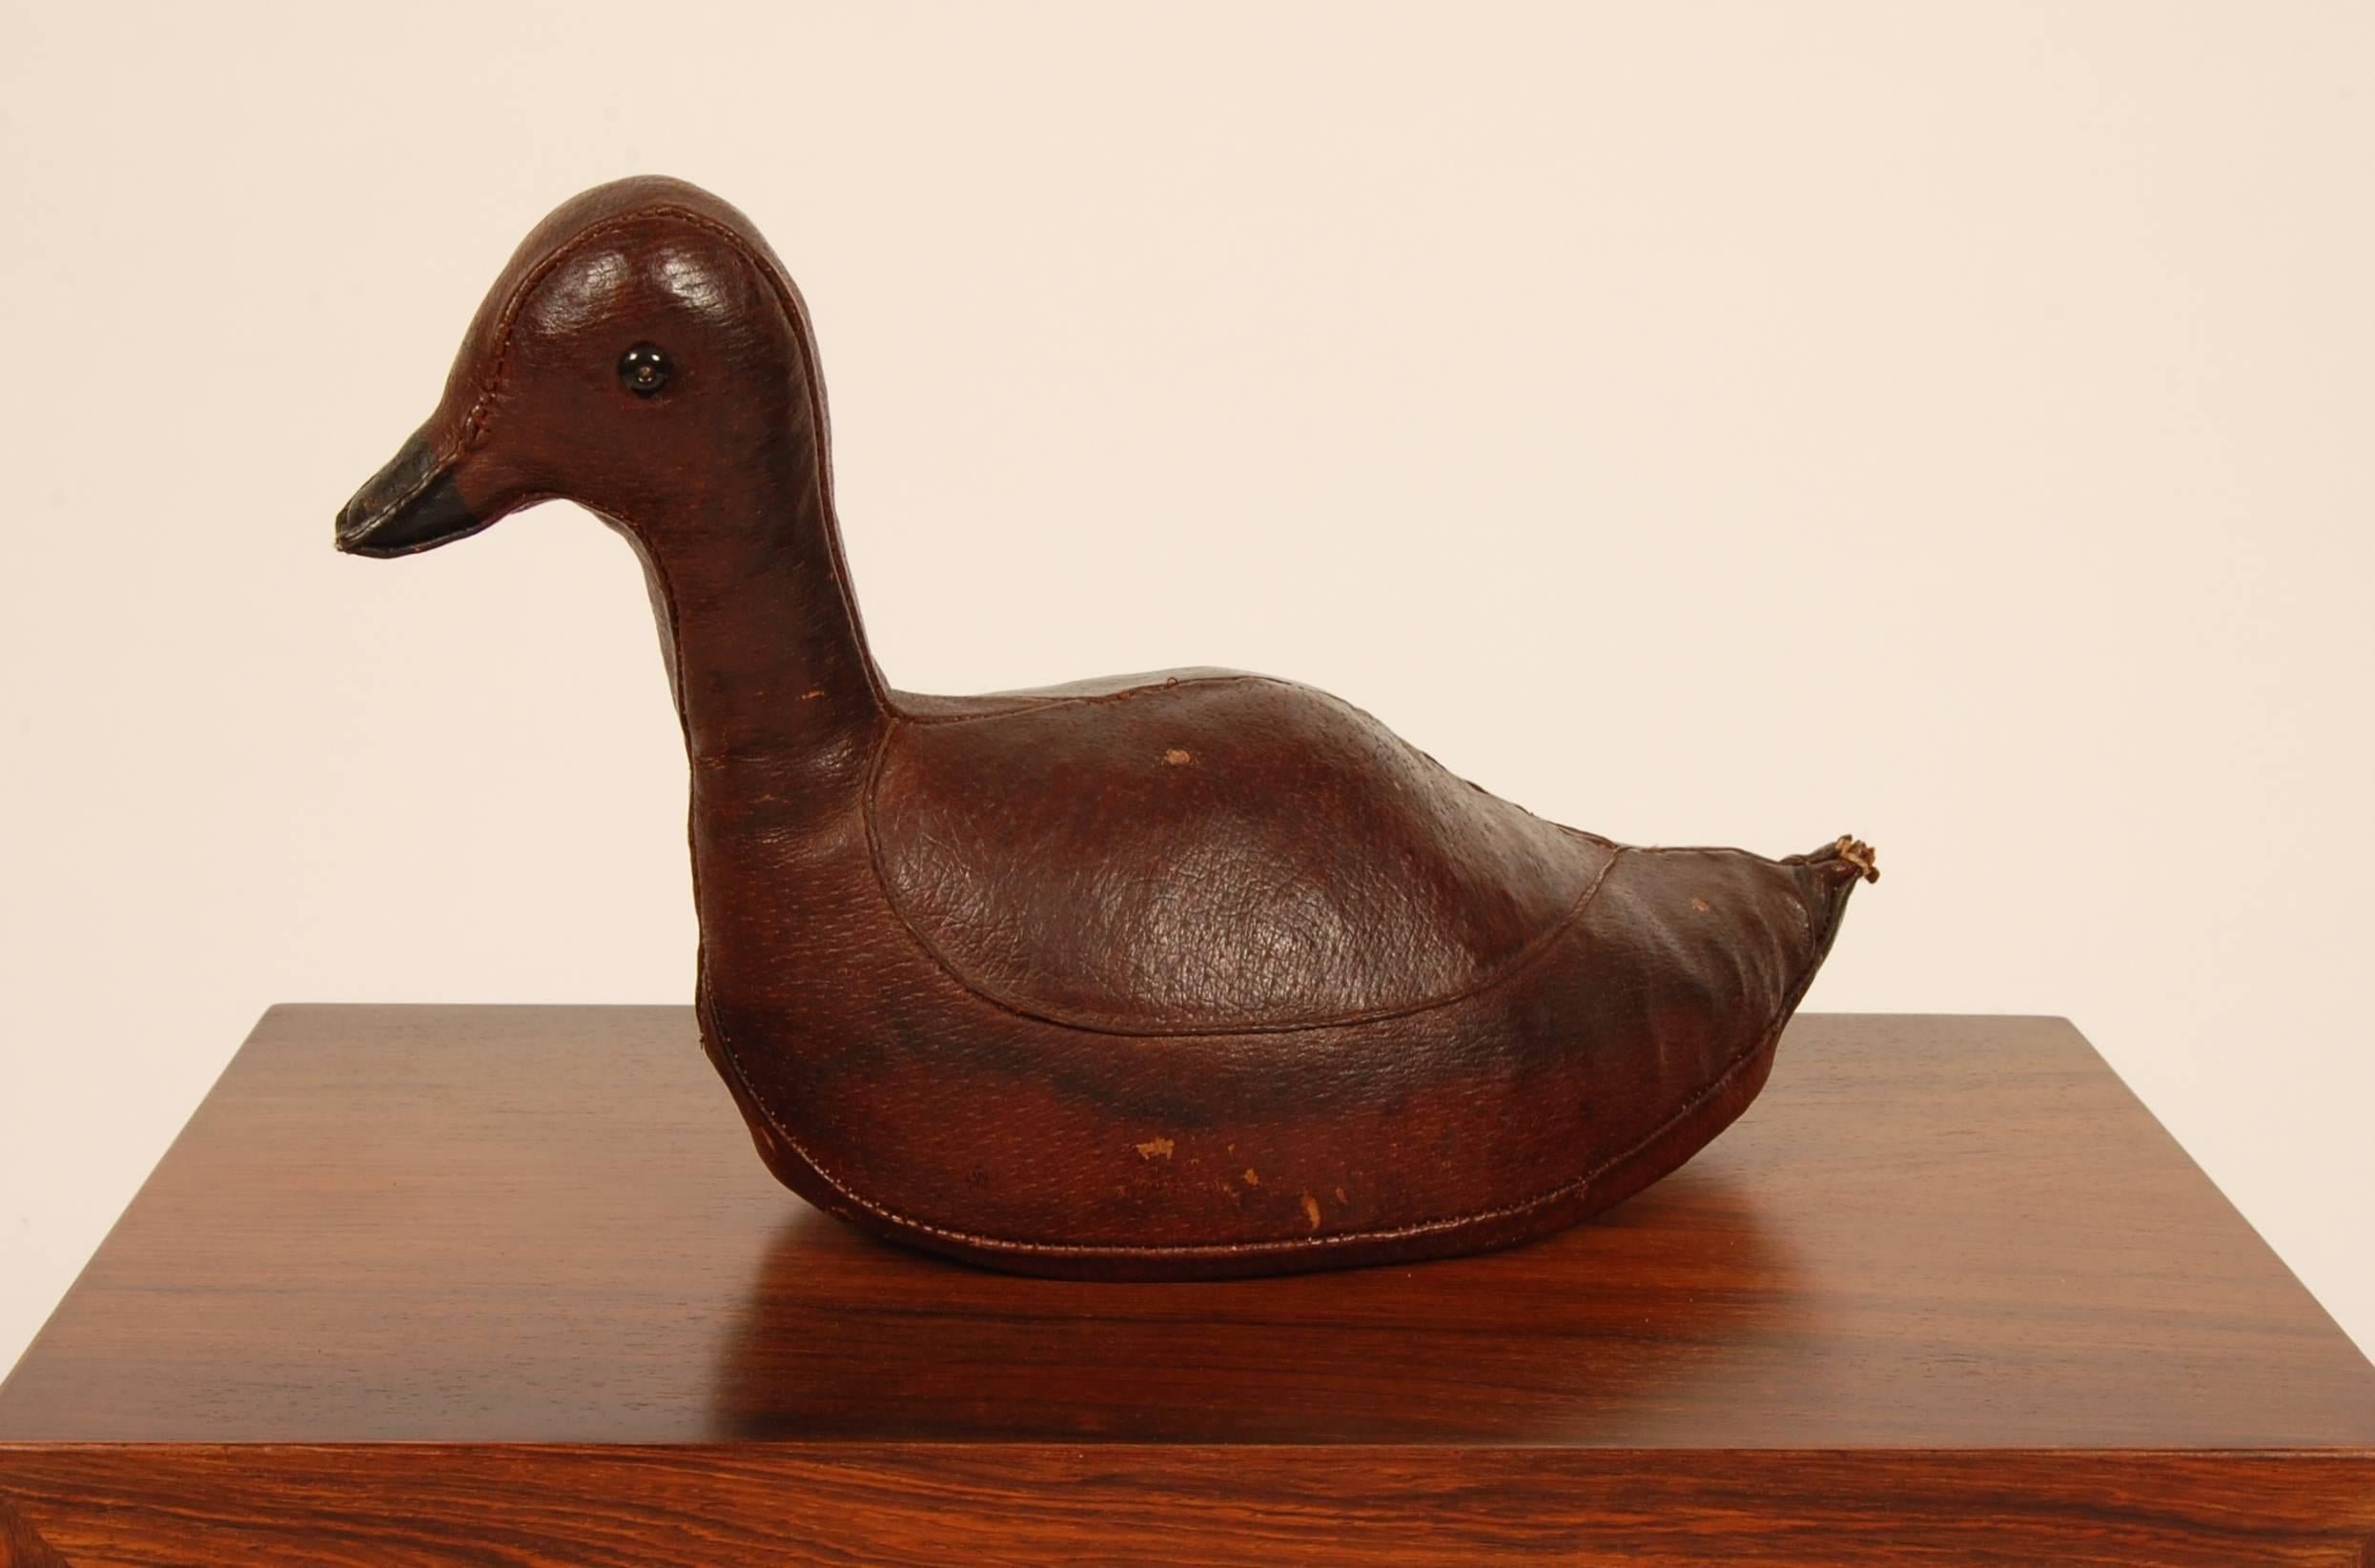 Handcrafted leather duck decoy created for Abercrombie and Fitch circa 1960s. Wonderful patina to the leather and a intricate level of craft in its construction.